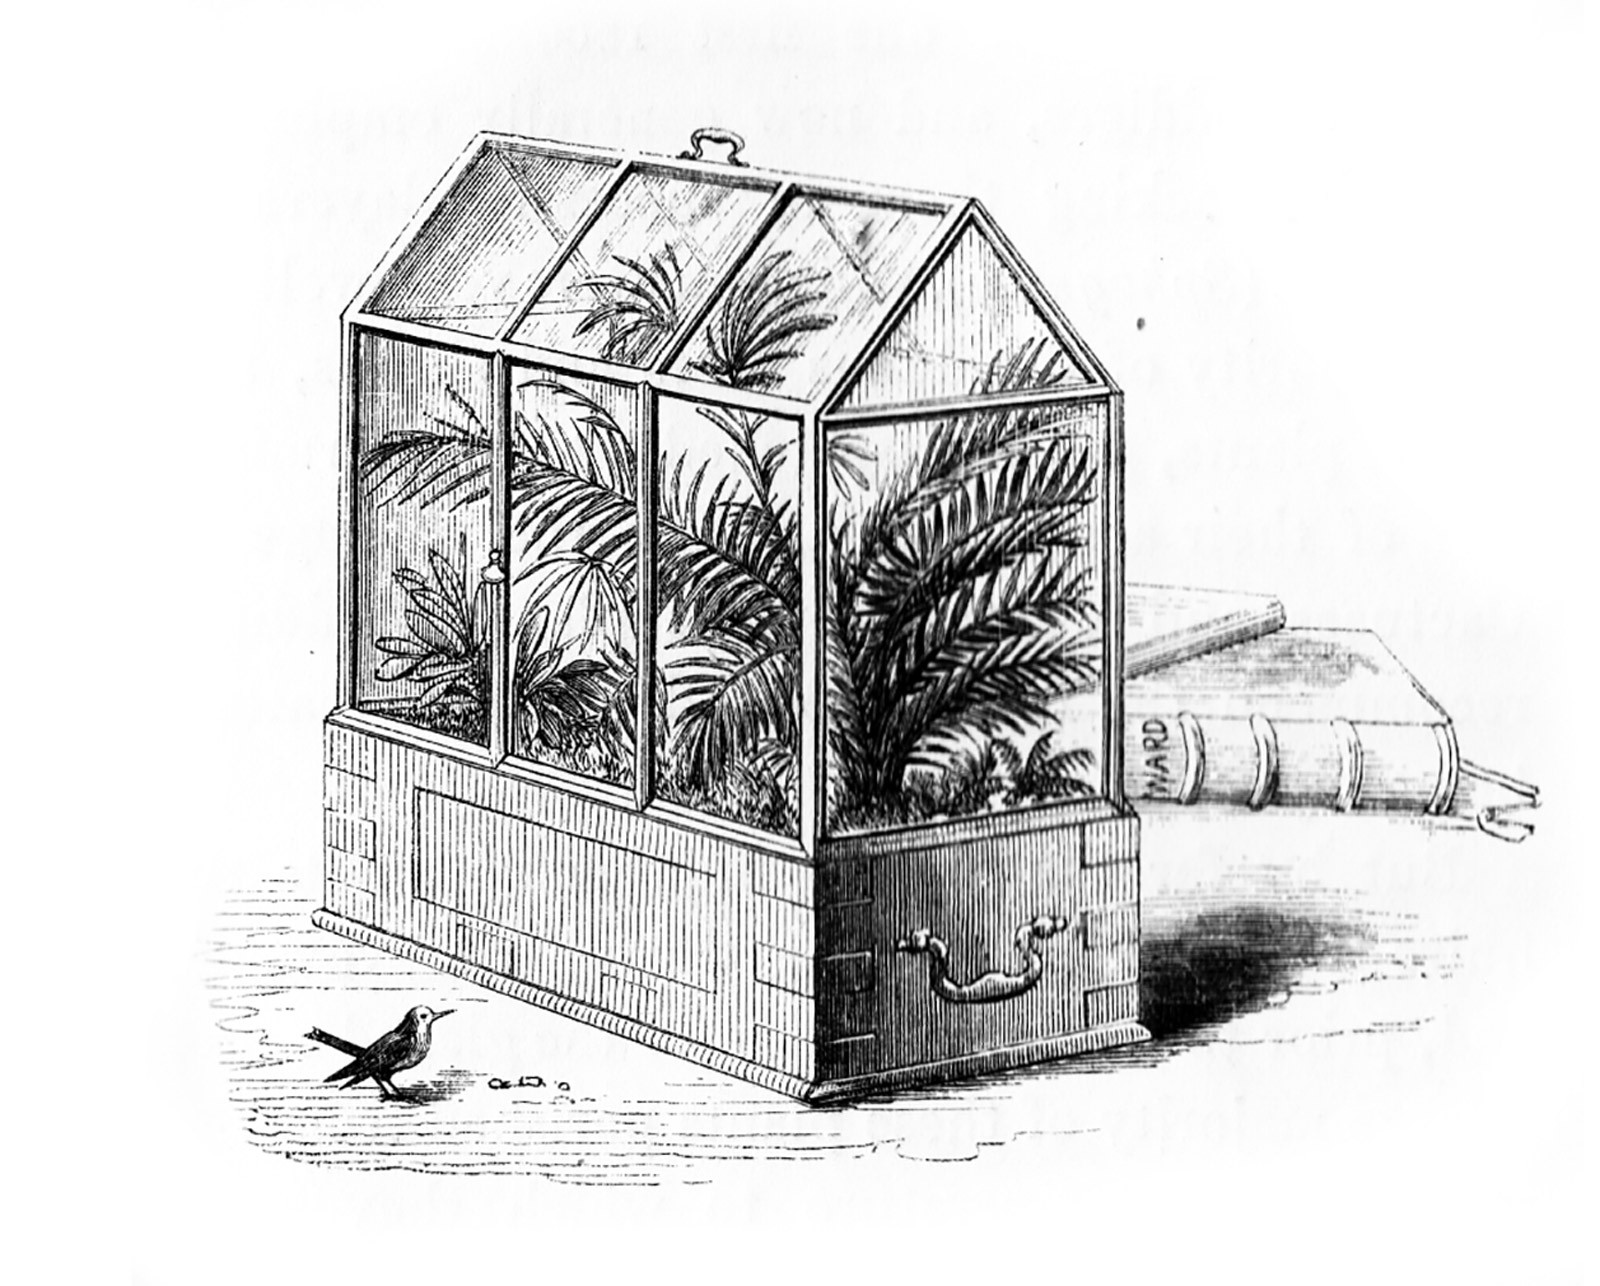 An eighteen fifty two illustration of a bird outside a Wardian glass case, from Nathaniel Ward’s “On the Growth of Plants in Closely Glazed Cases.”